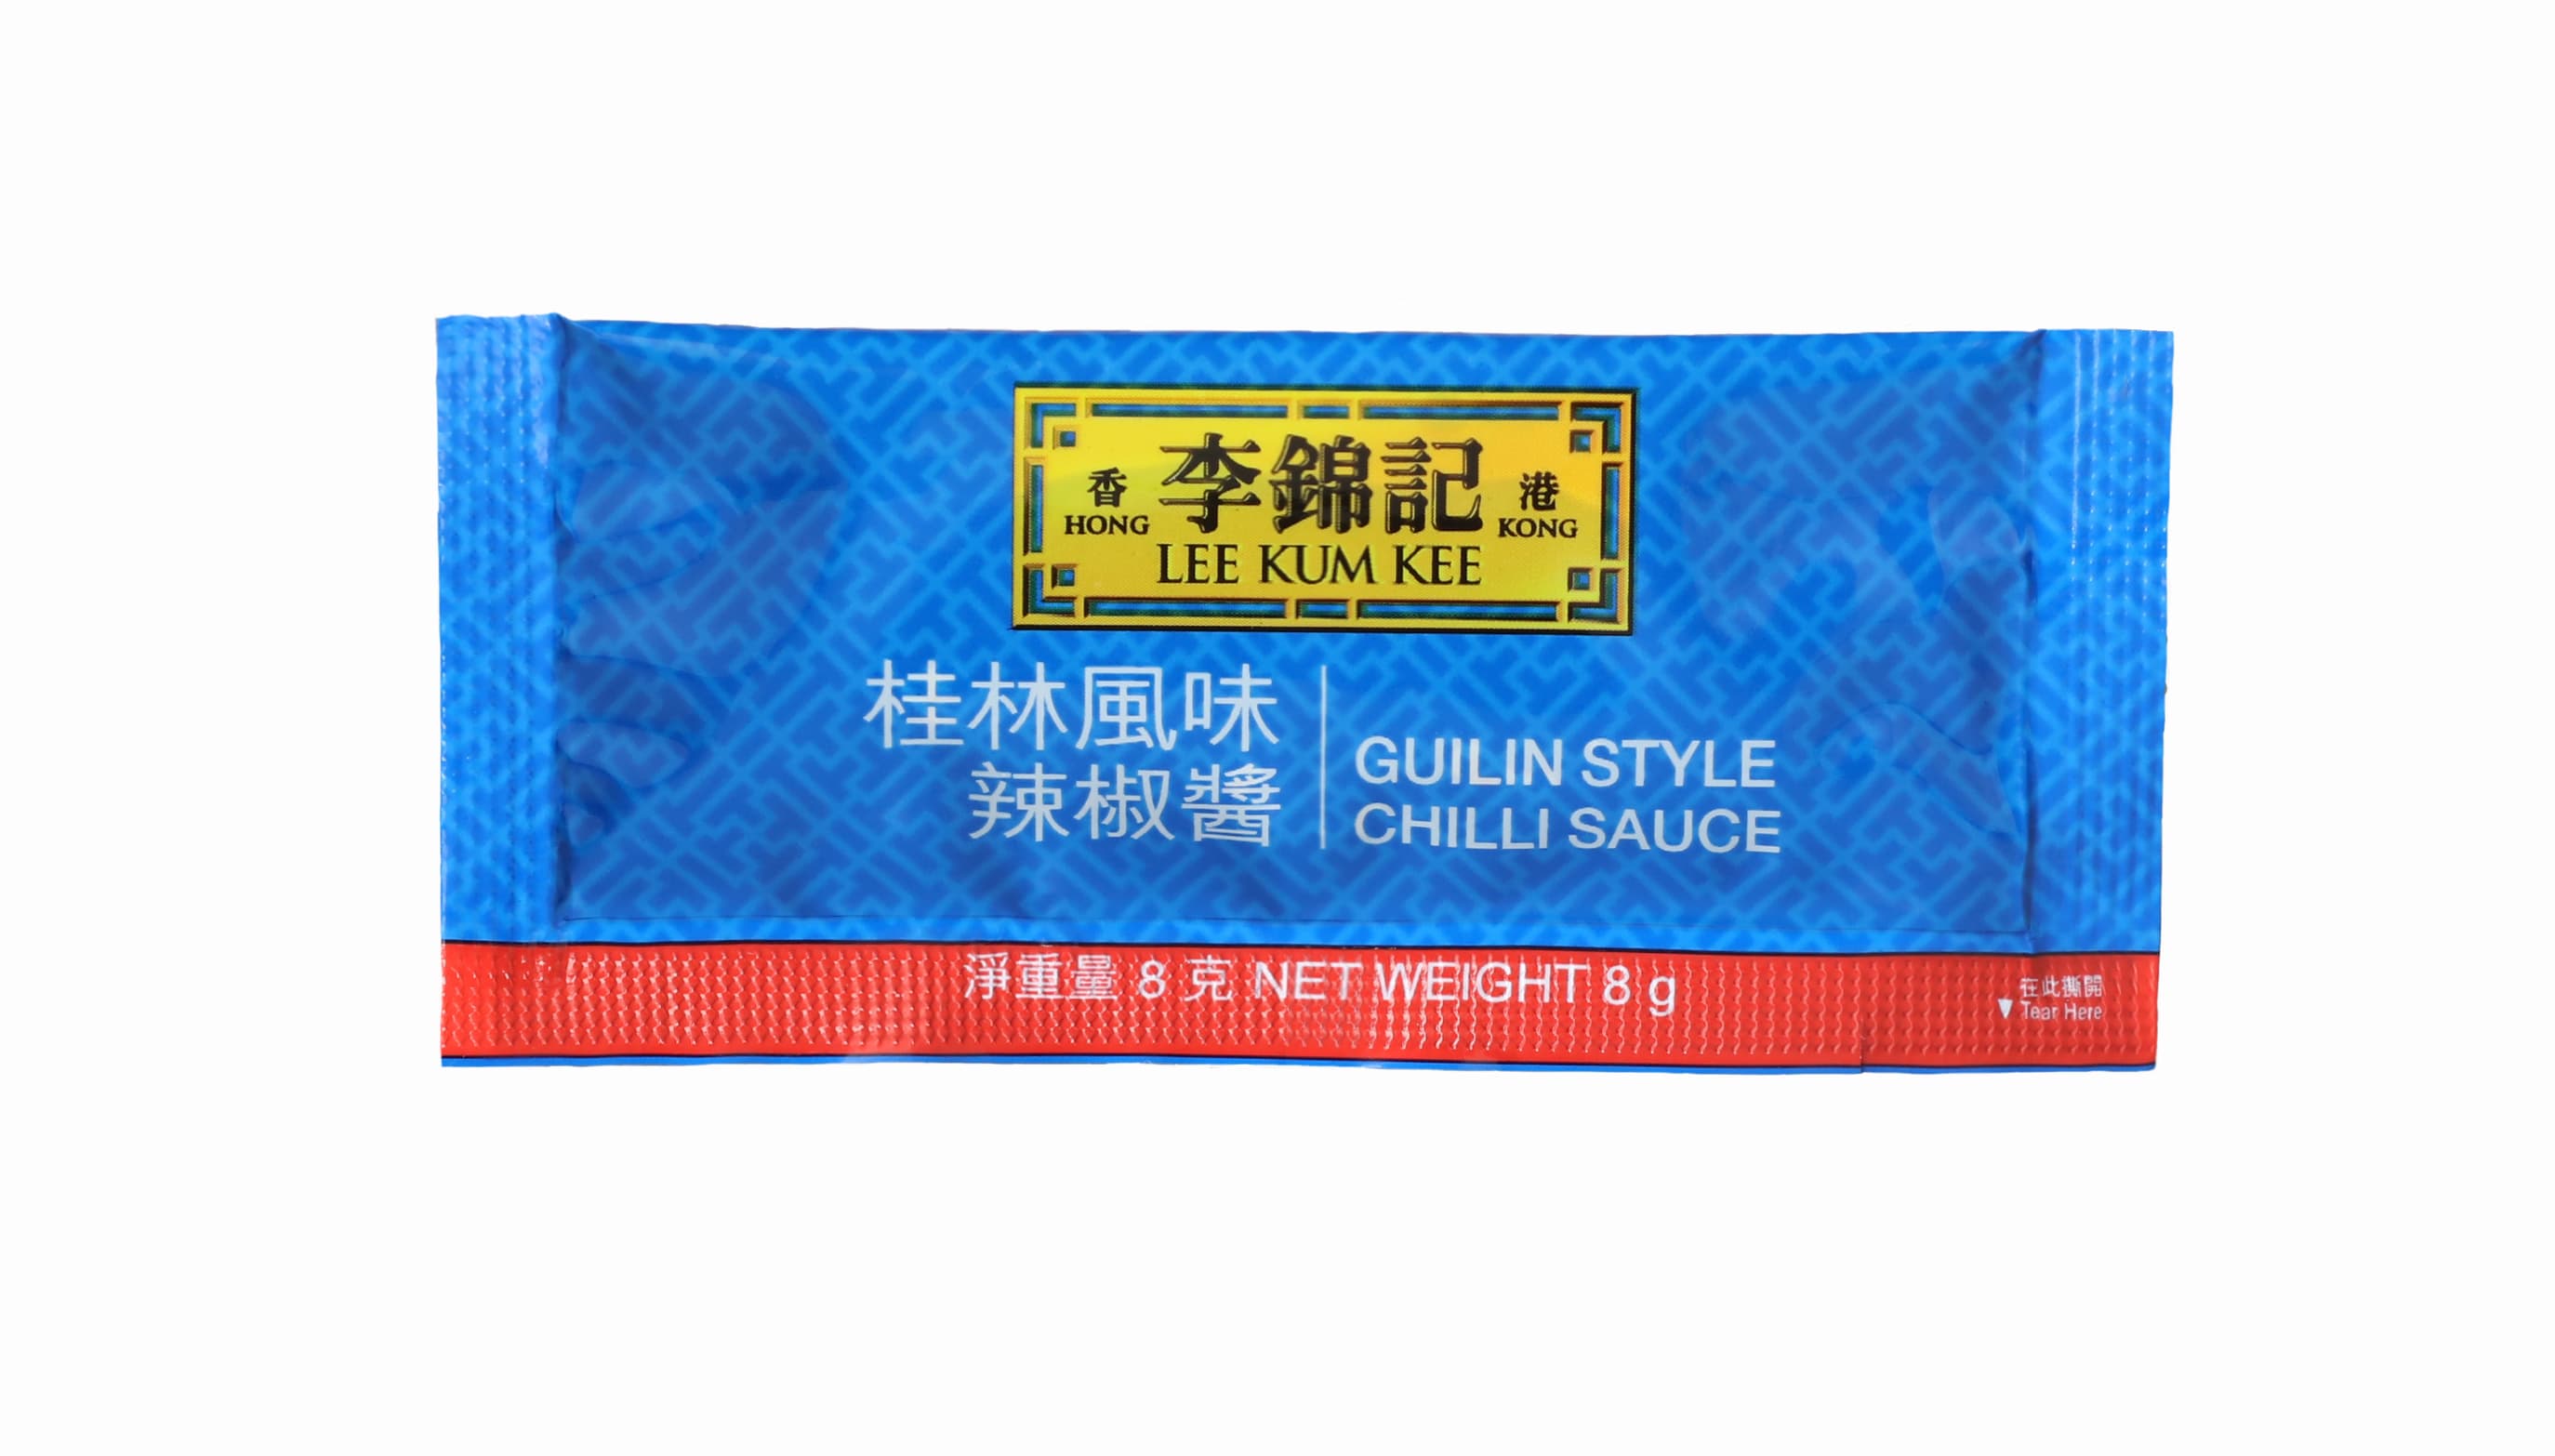 guililn style chilli sauce 8g